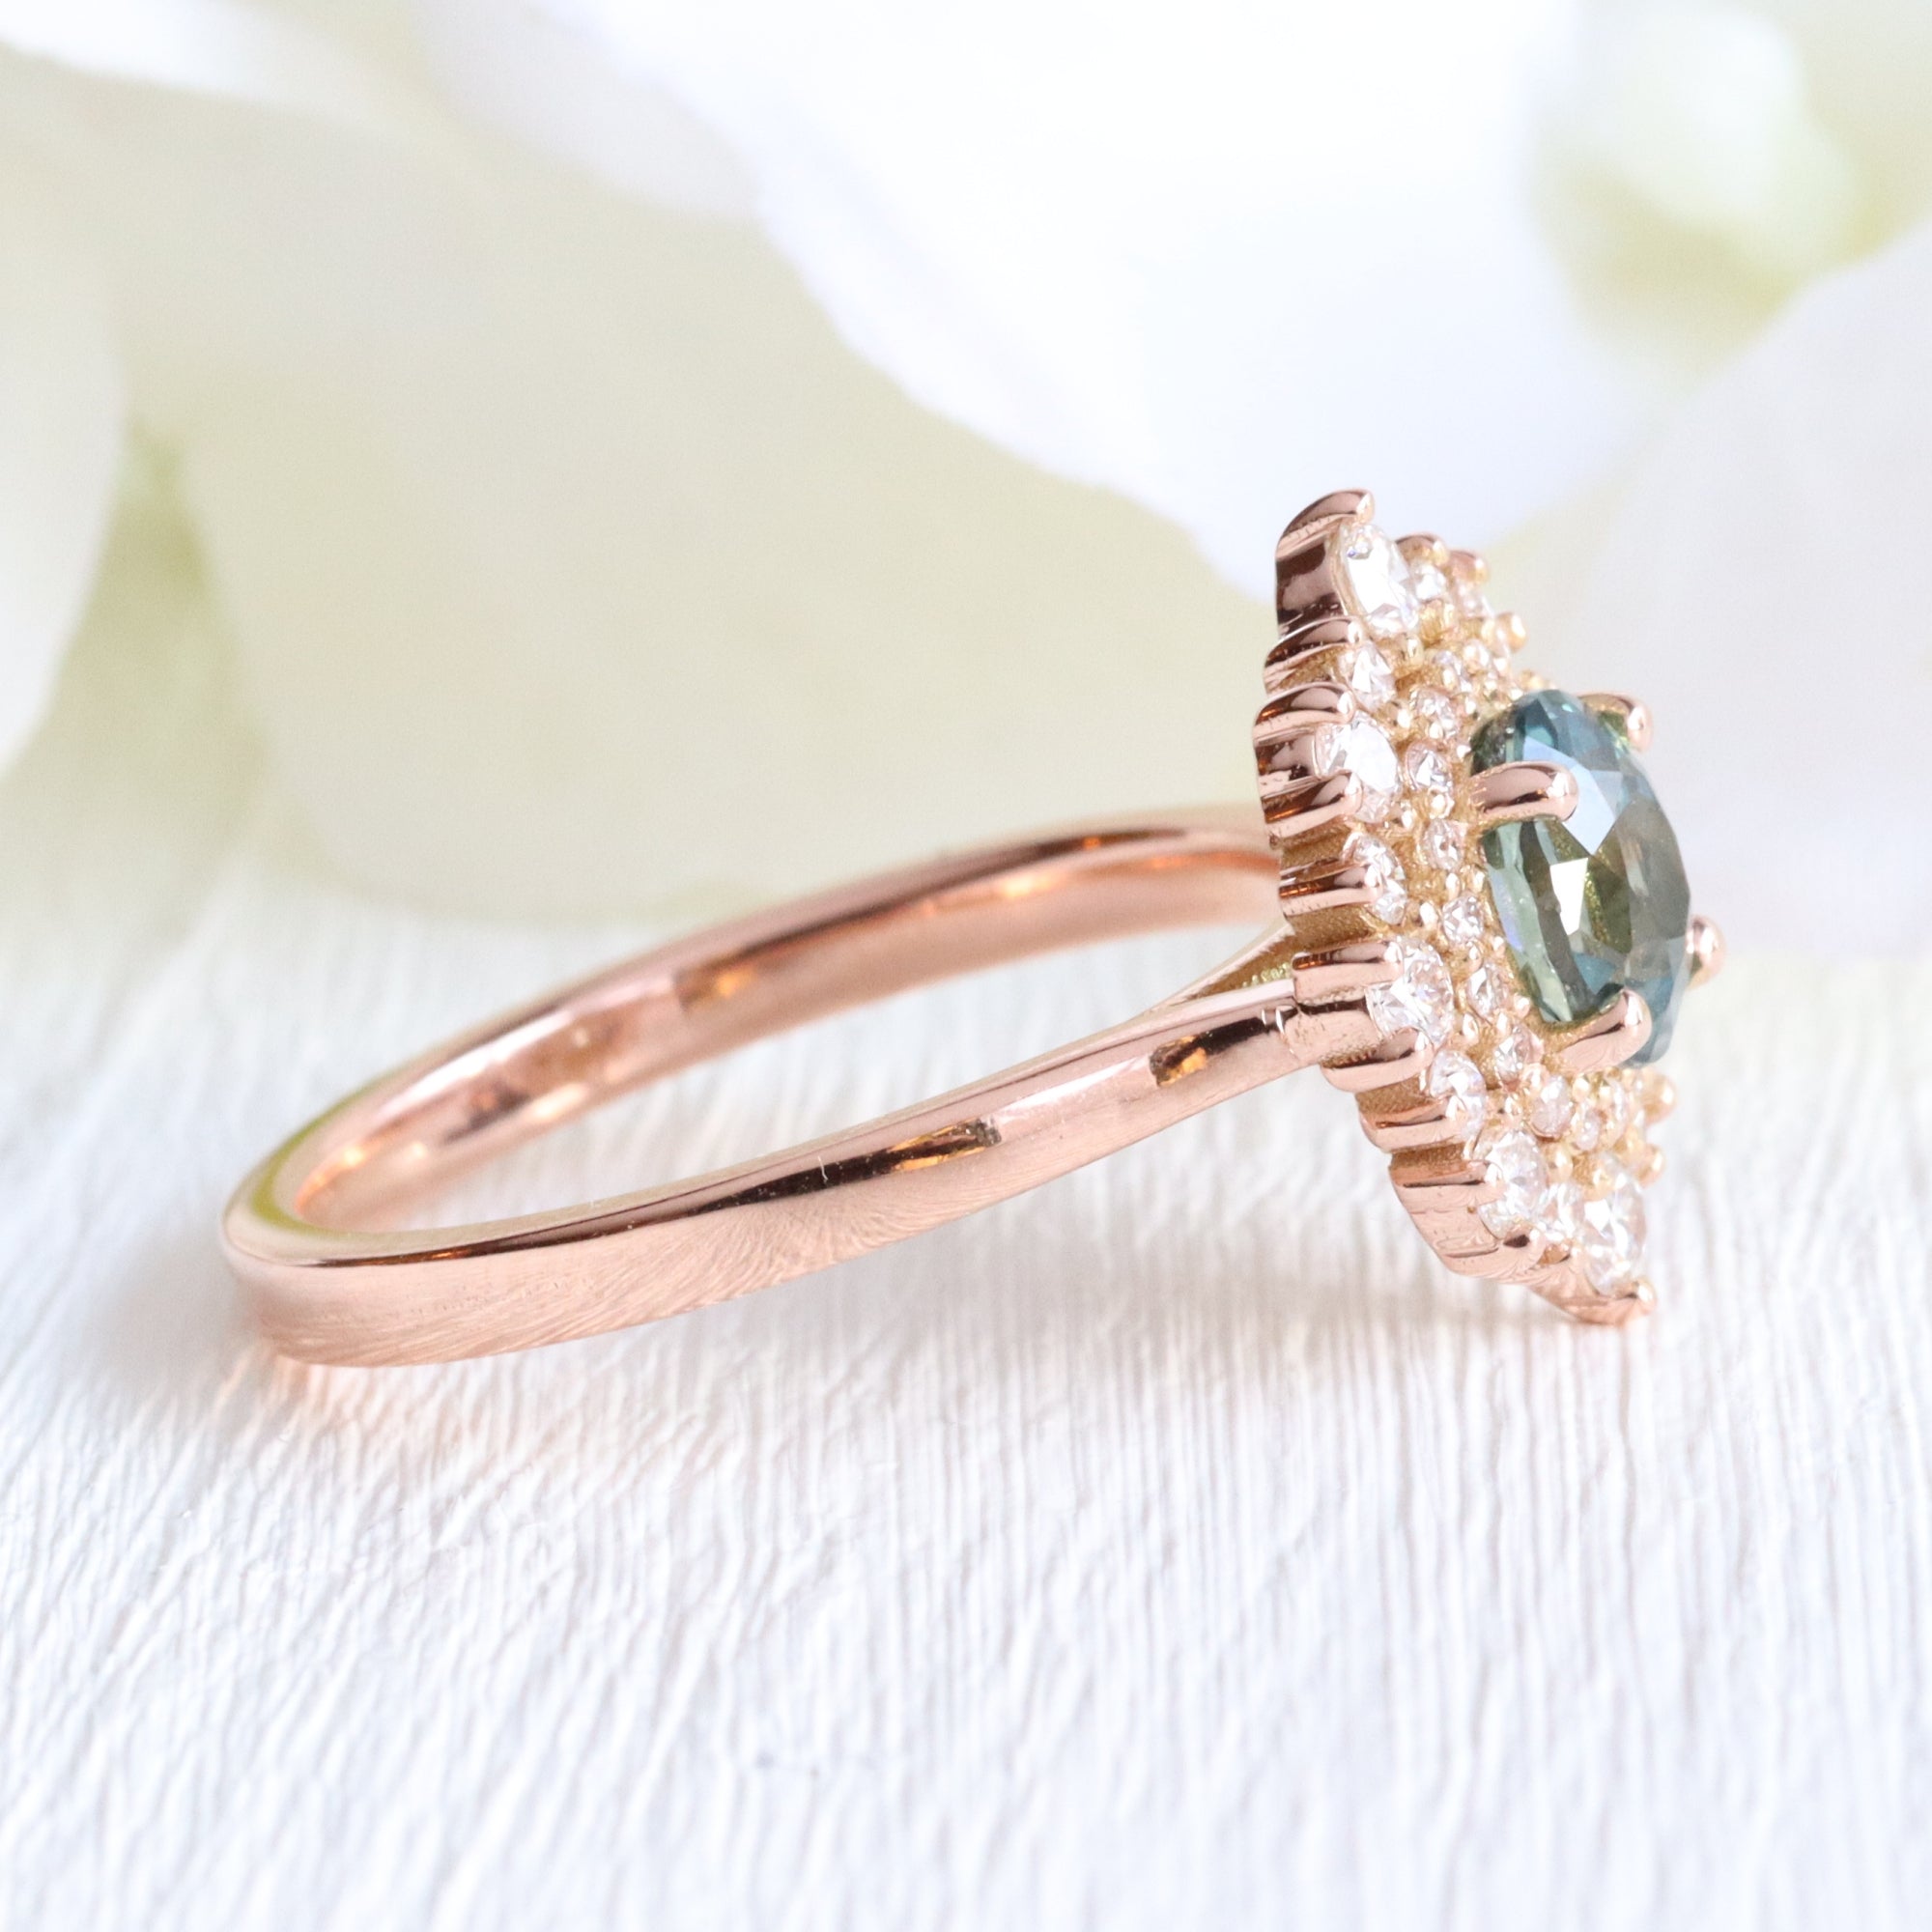 Oval teal green sapphire ring rose gold double halo diamond engagement ring la more design jewelry